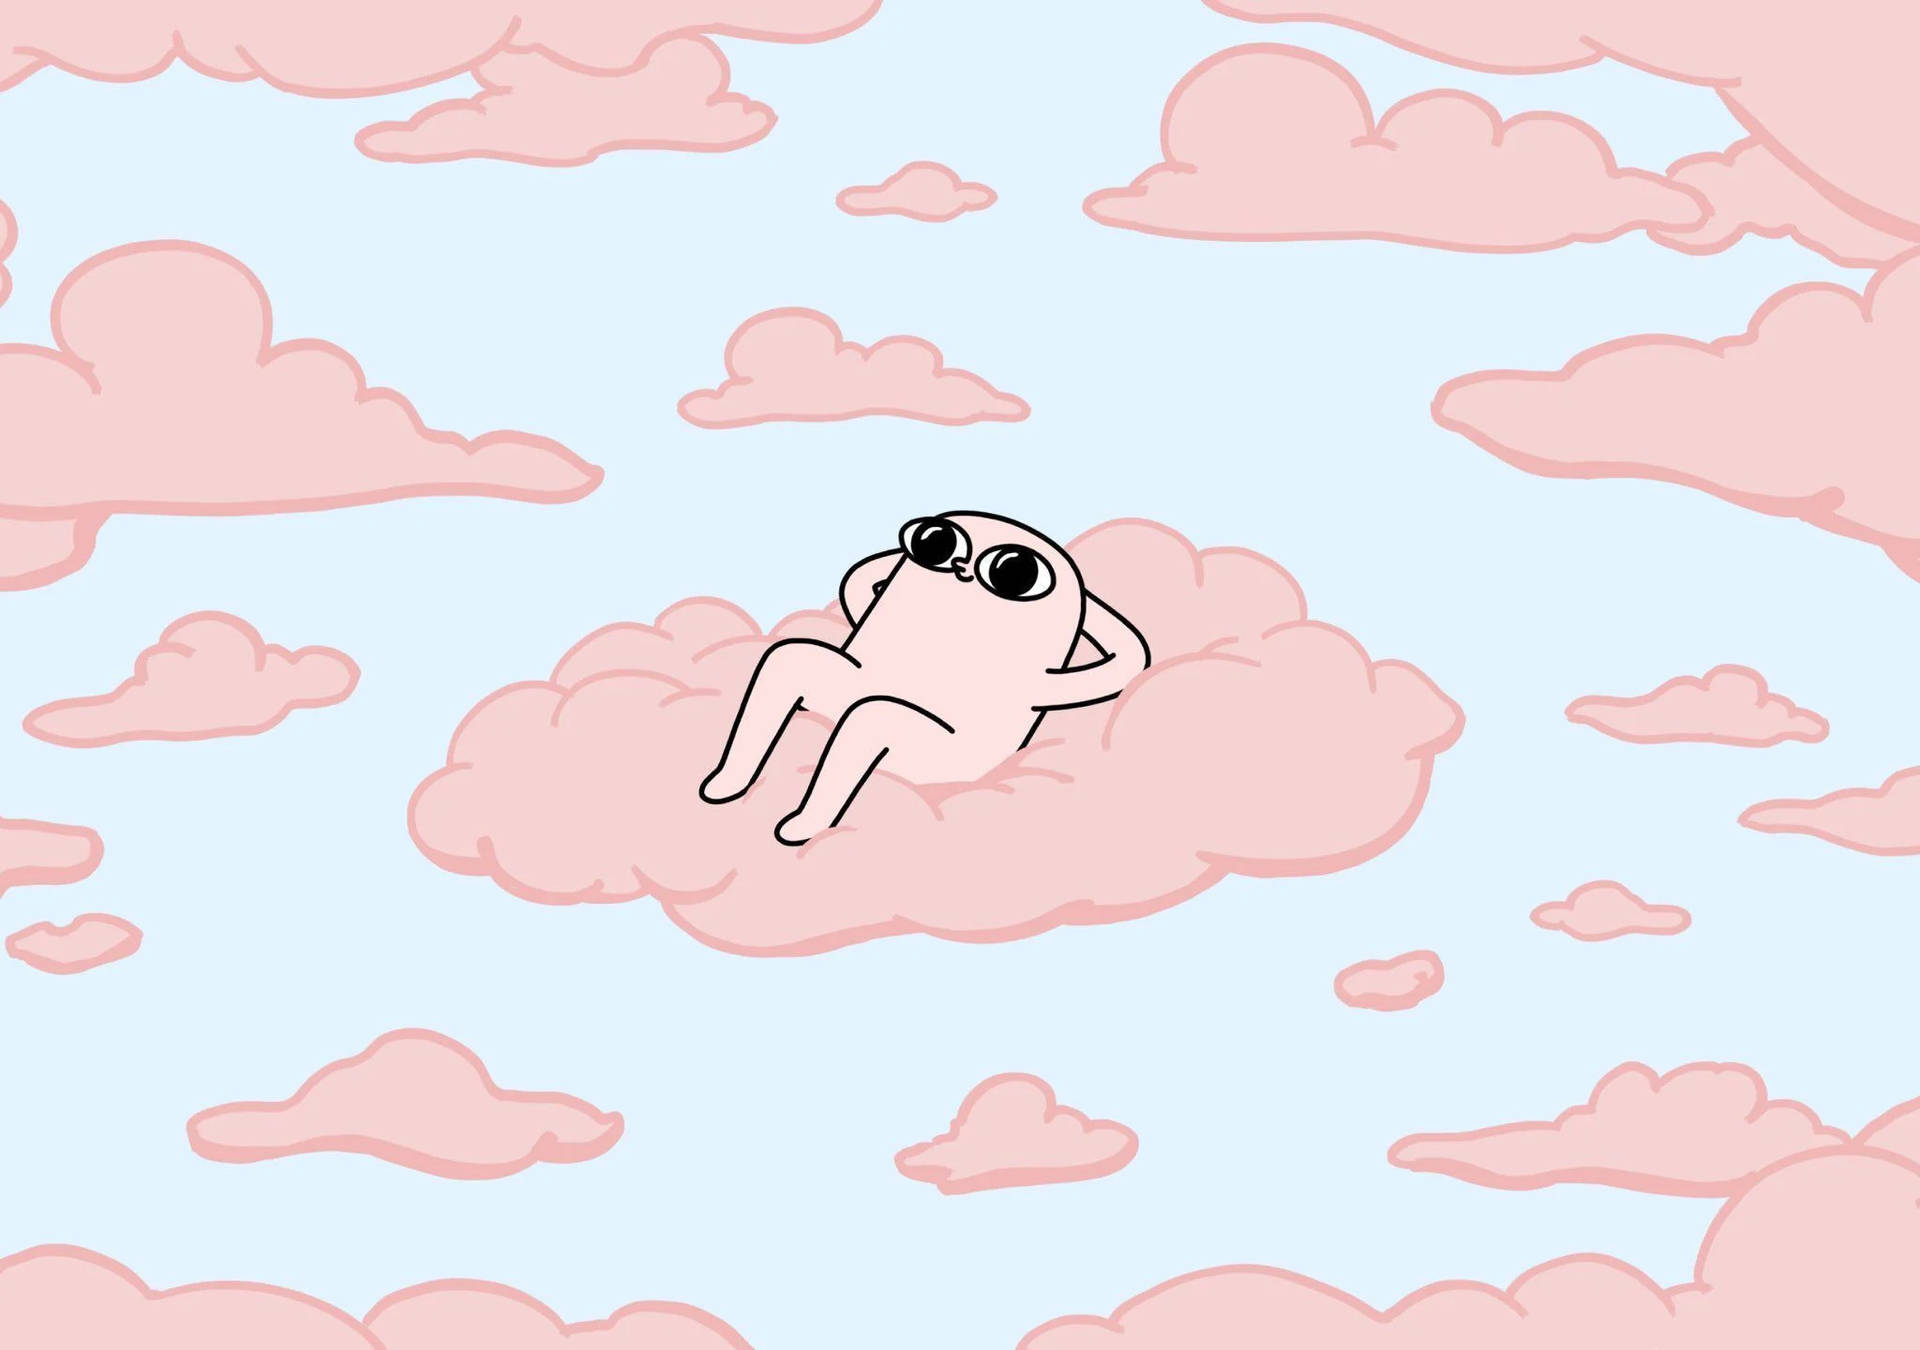 Aesthetic Cartoon Chilling Ketnipz Character In Sky